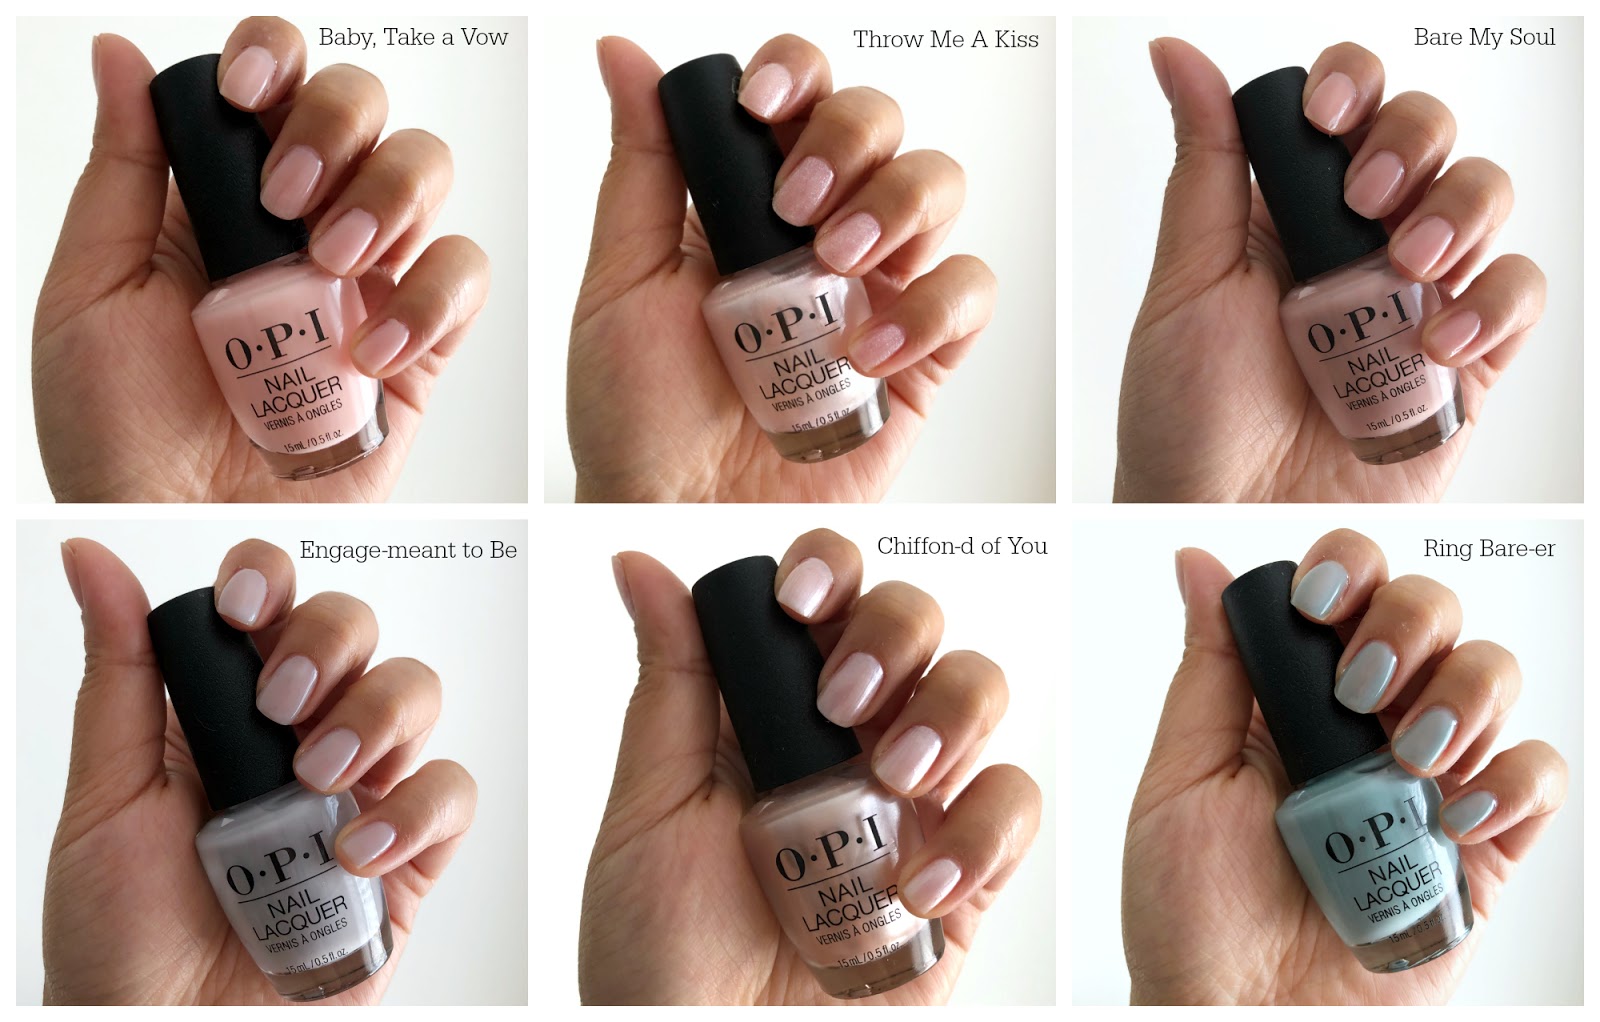 2. OPI Nail Lacquer in "Bare My Soul" - wide 2